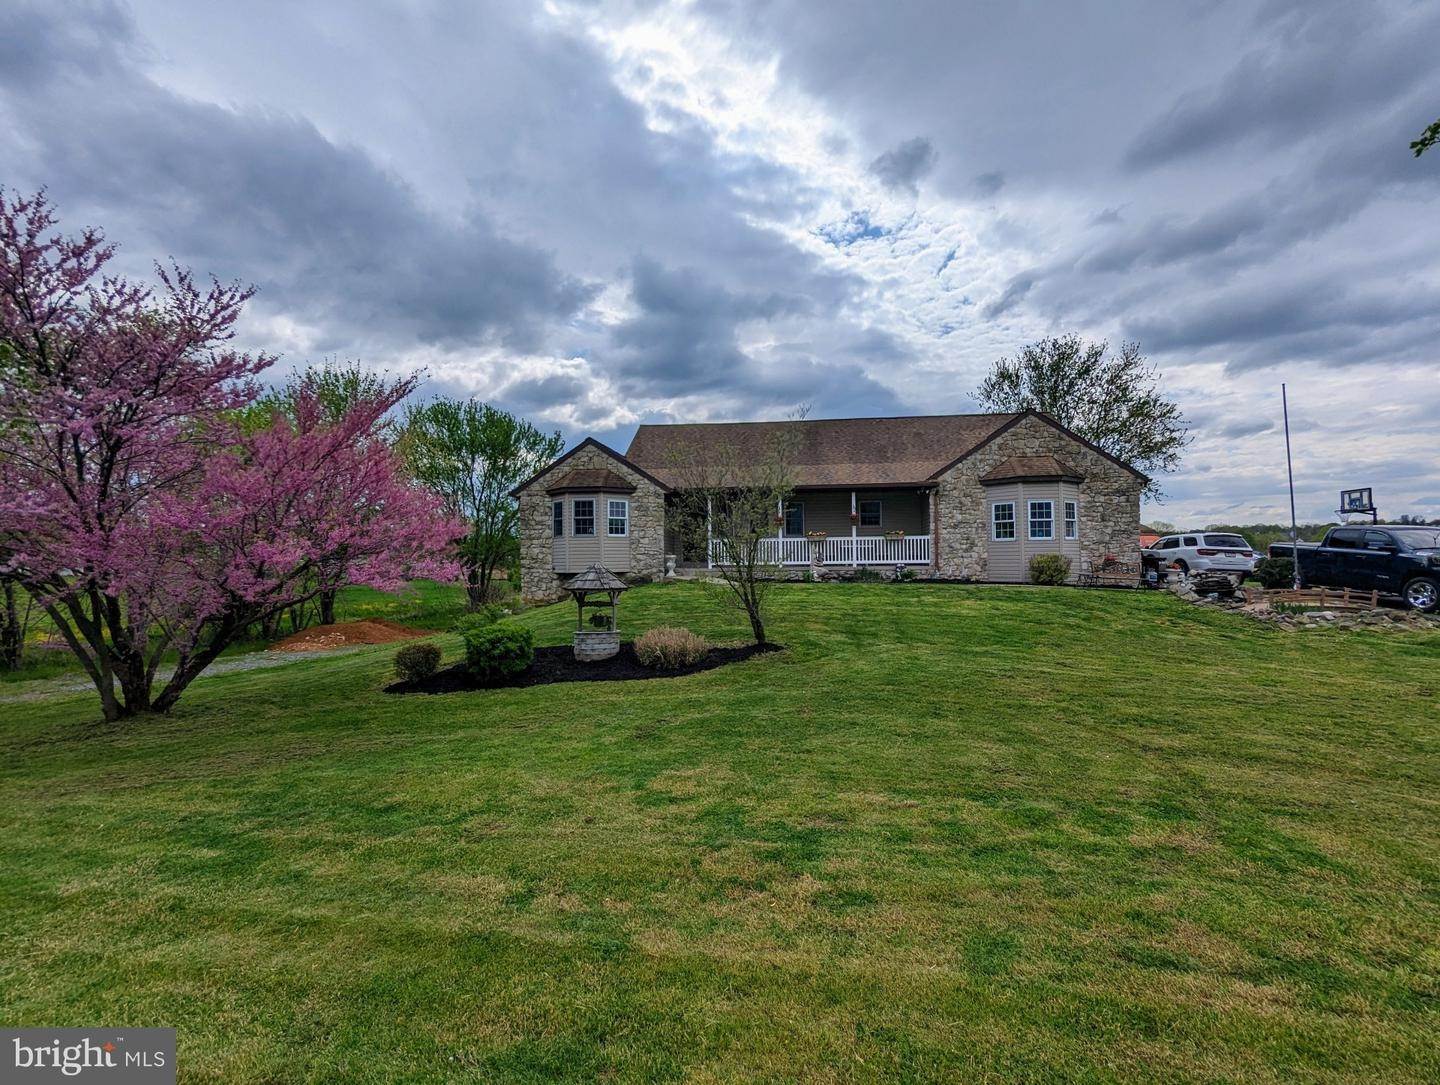 Residential for Sale at 318 RIDGEVIEW RD N Elizabethtown, Pennsylvania 17022 United States